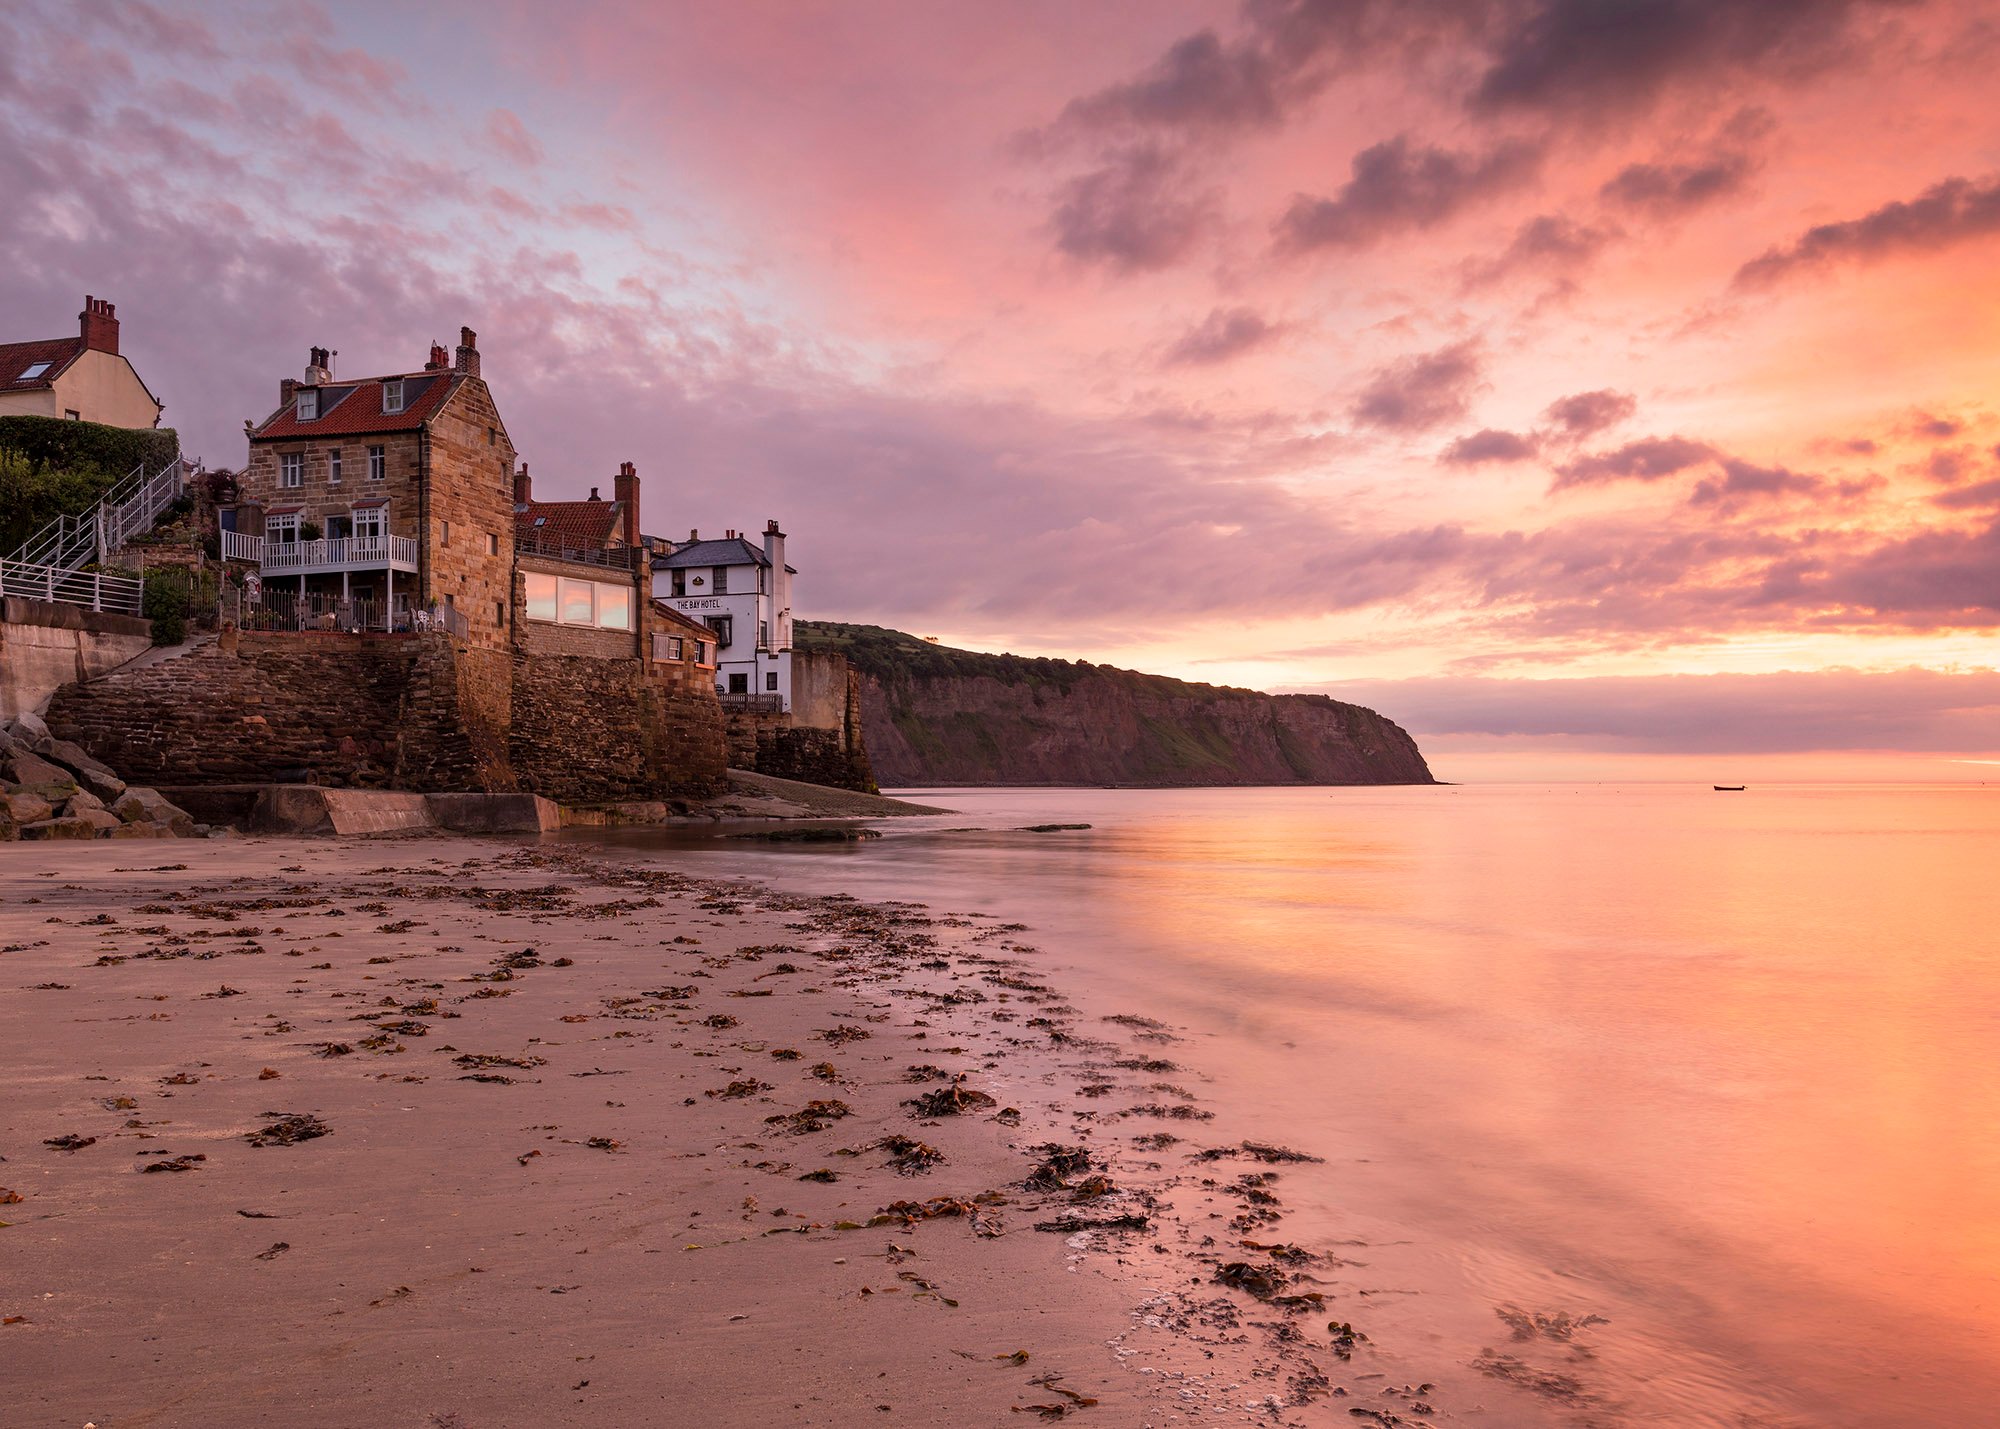 Image name robin hoods bay red dawn the 9 image from the post Robin Hood's Bay in Yorkshire.com.